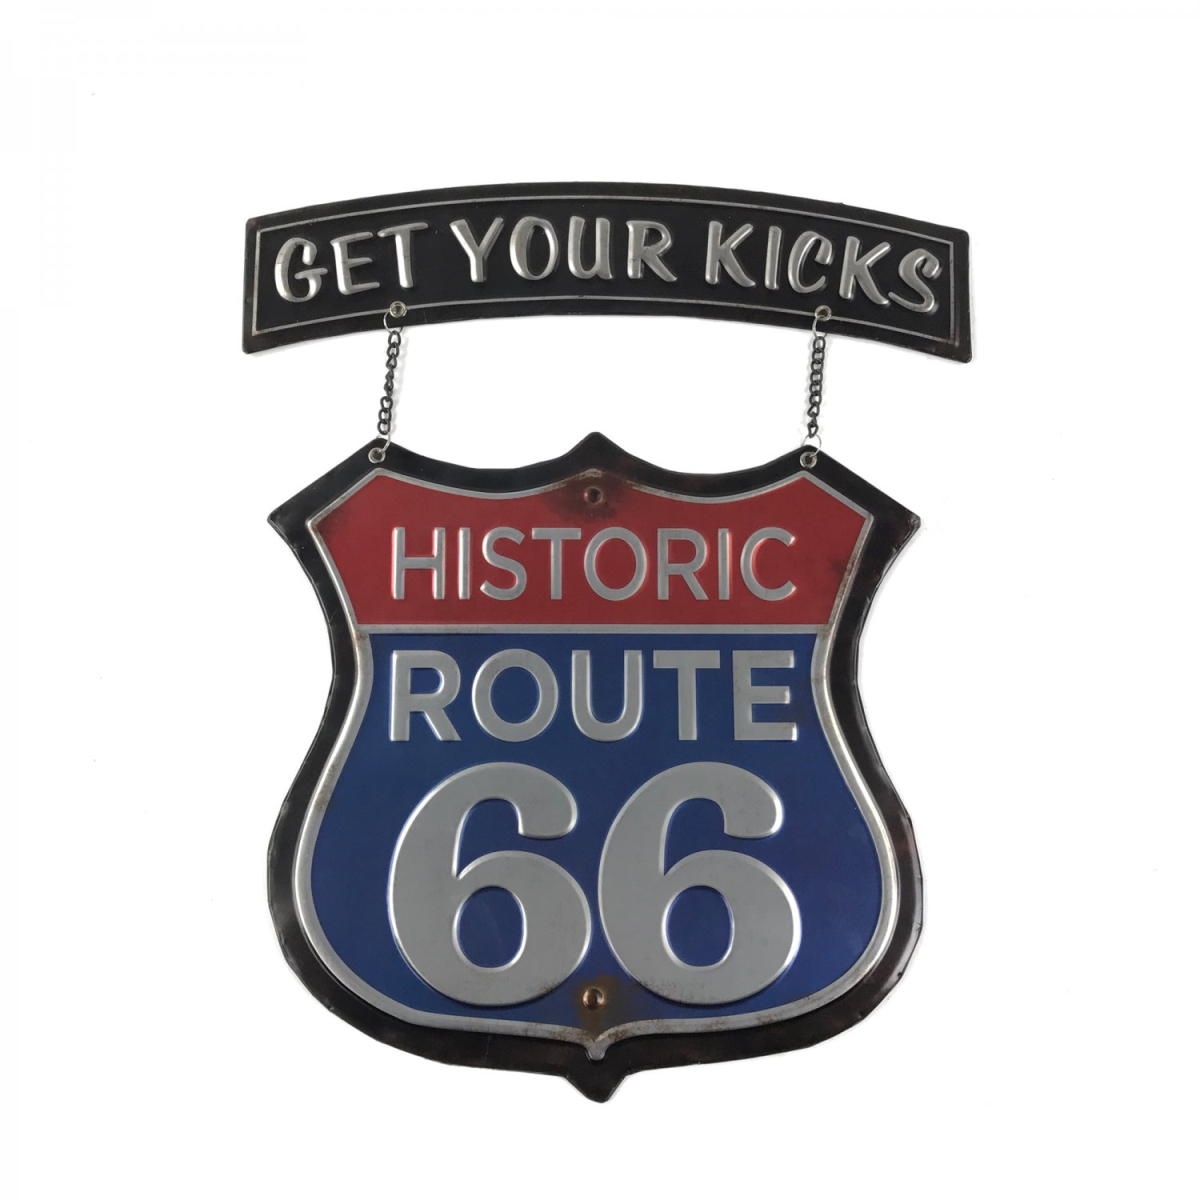 323929 Get Your Kicks Hanging Route 66 Metal Sign